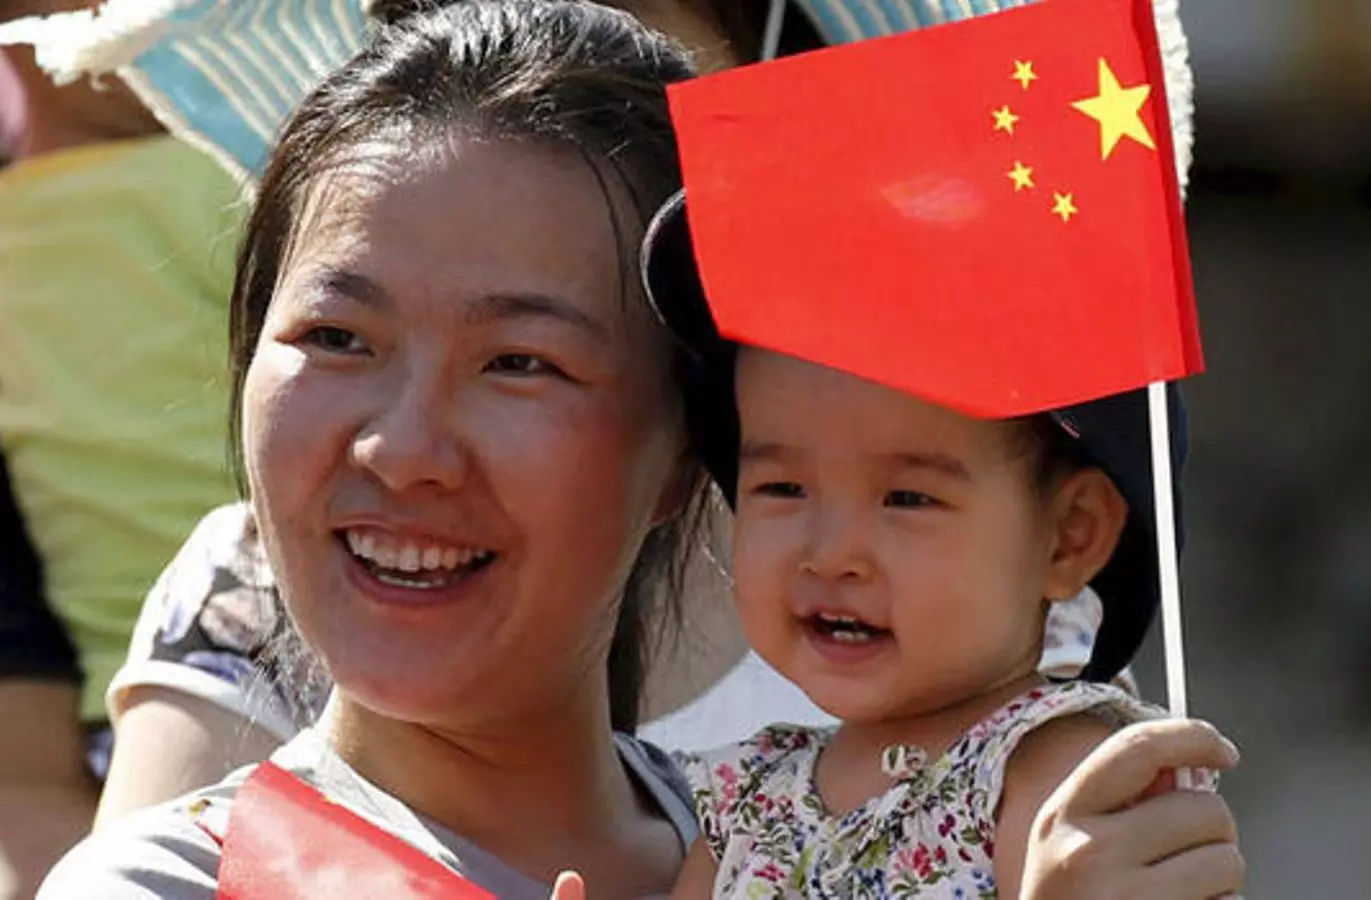 Women in China do not want more children